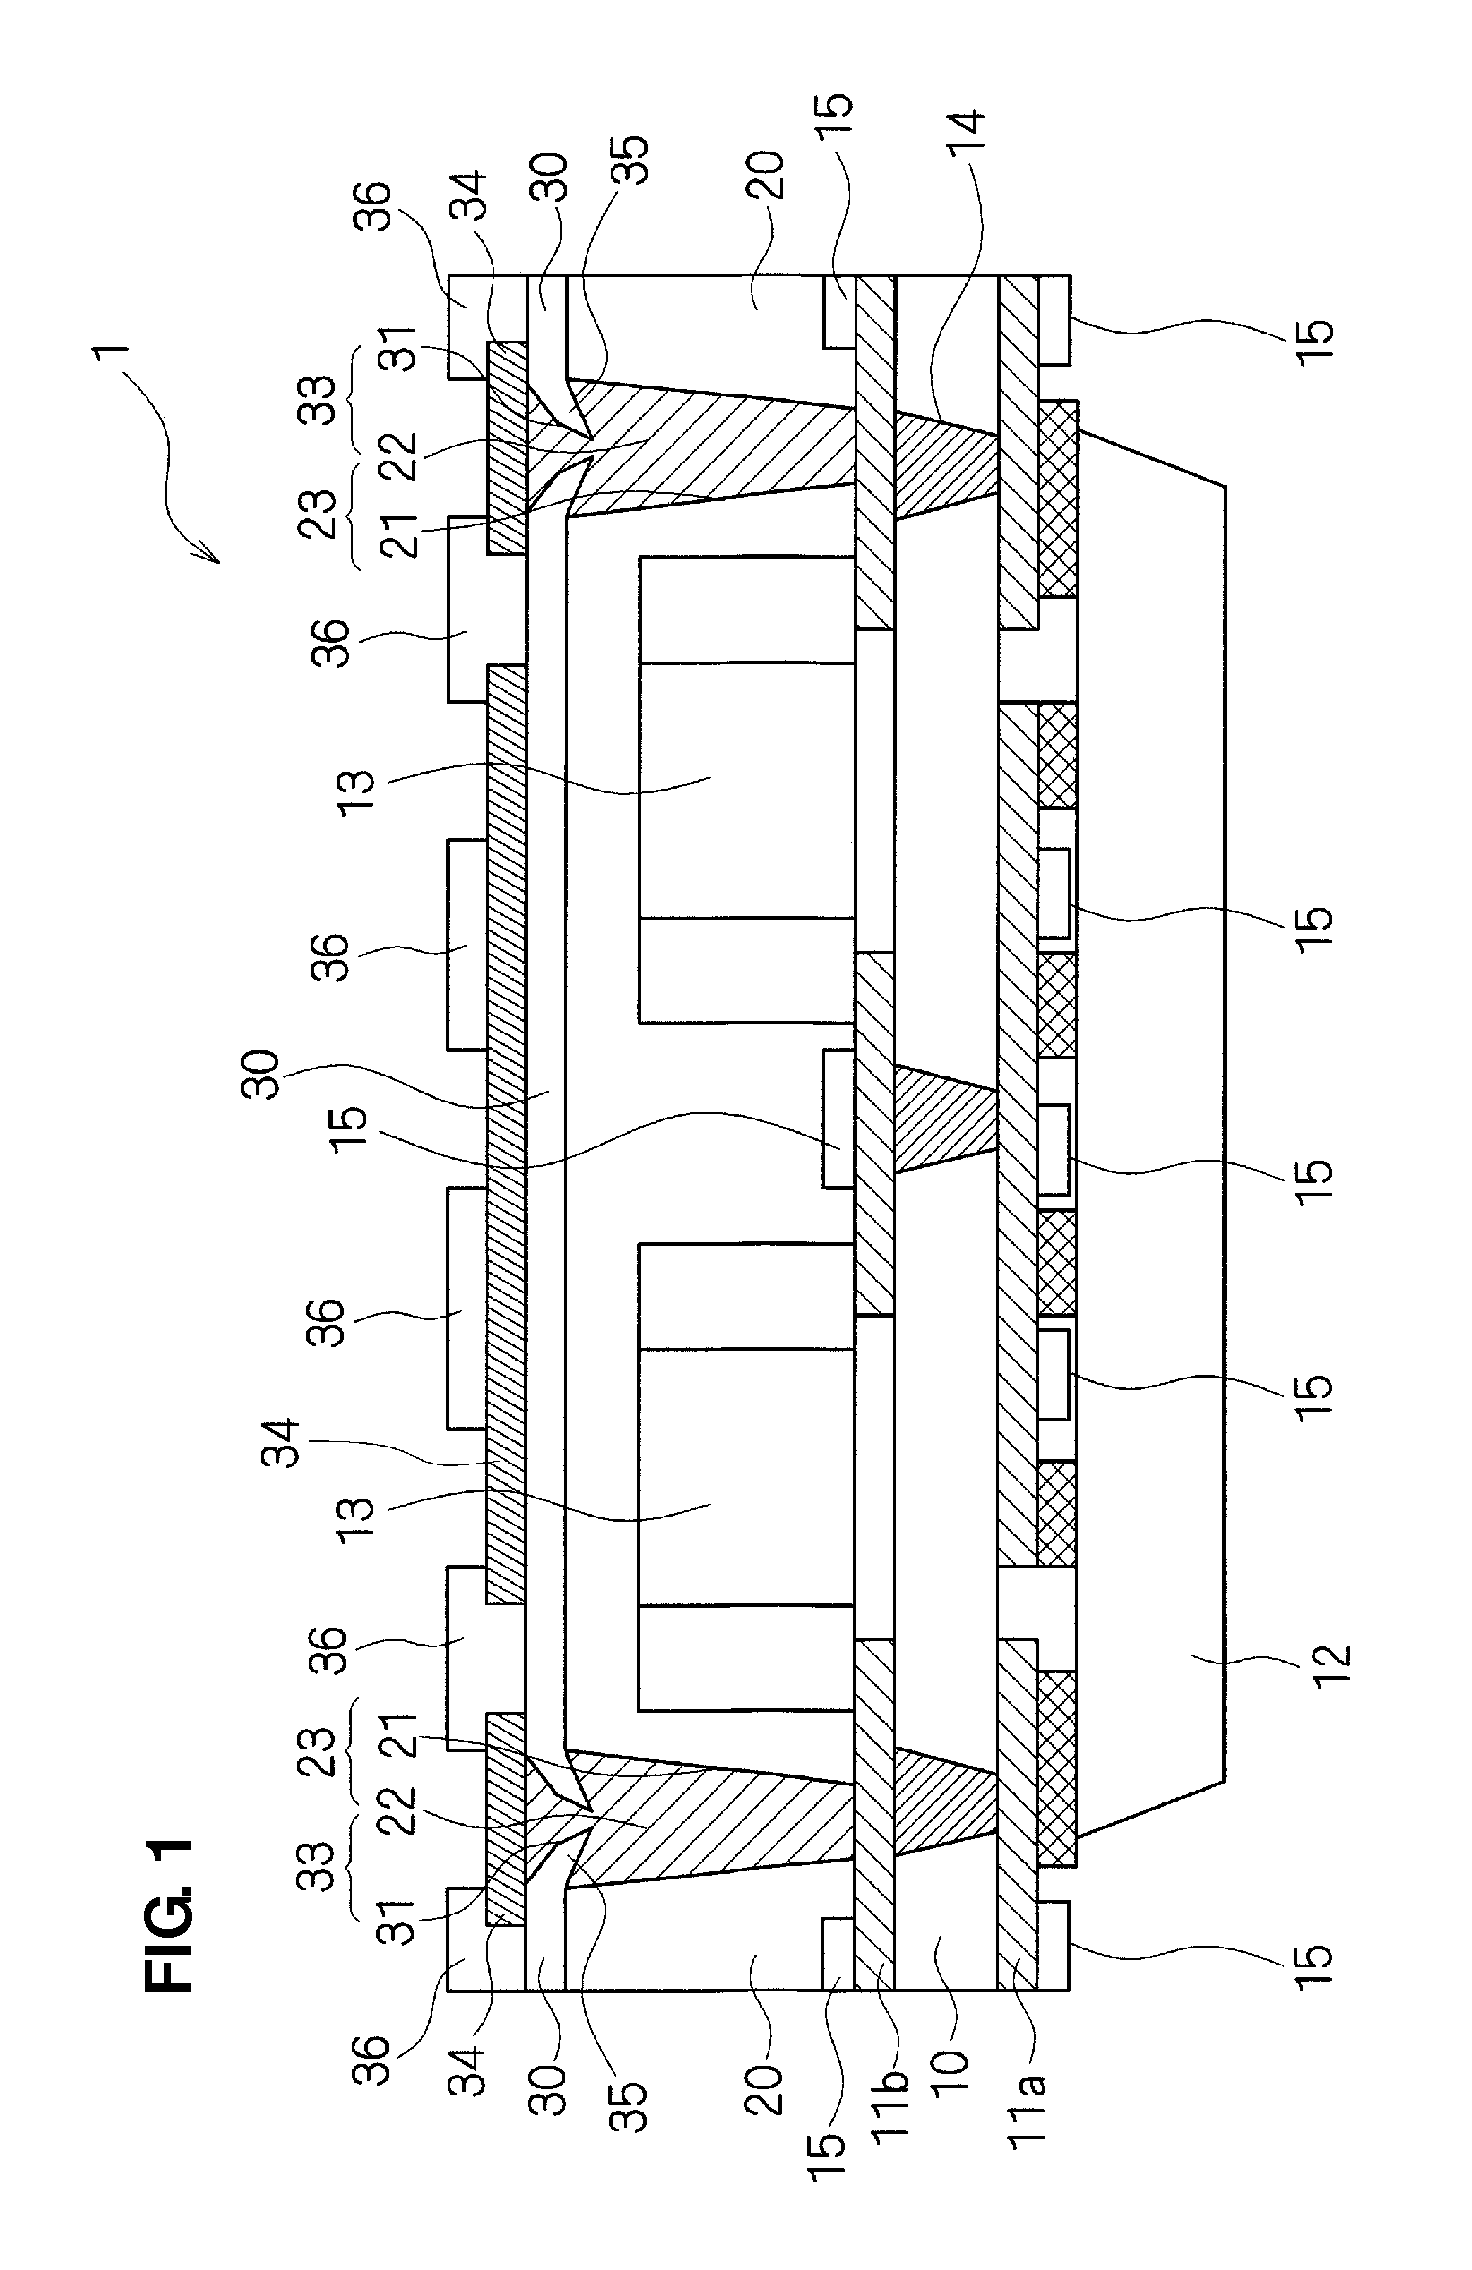 Resin multilayer substrate and method for manufacturing the resin multilayer substrate